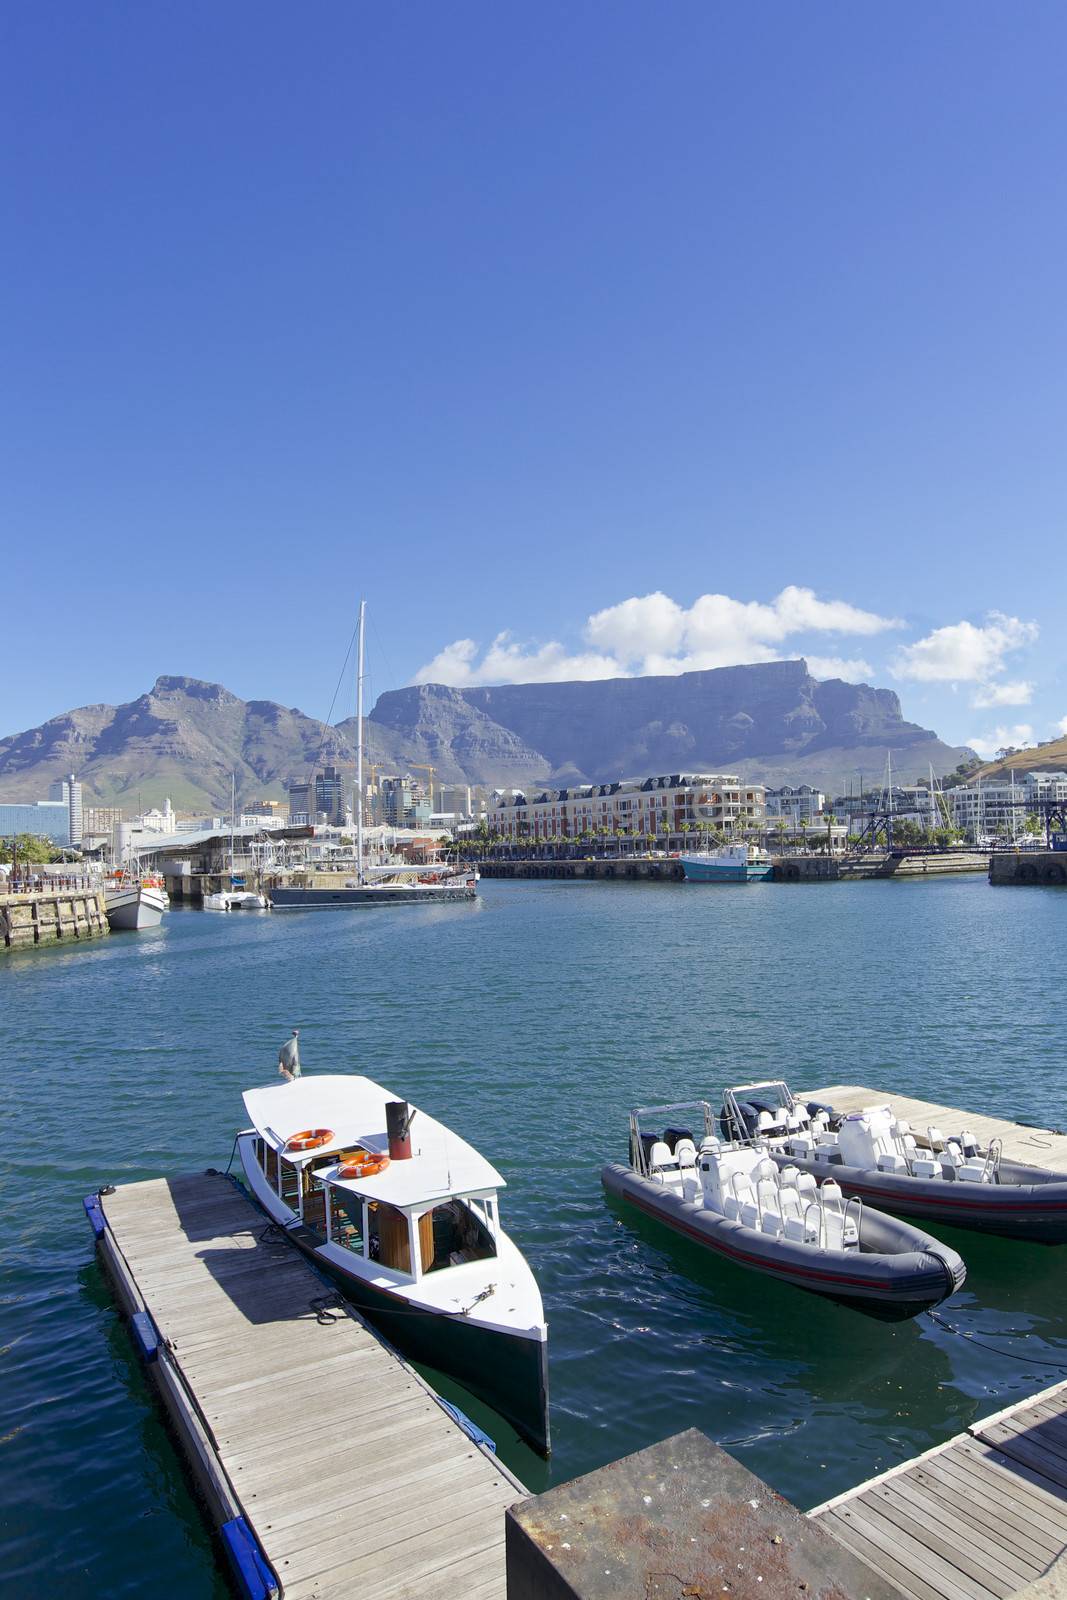 View of Table mountain from the waterfront in Cape Town, South Africa